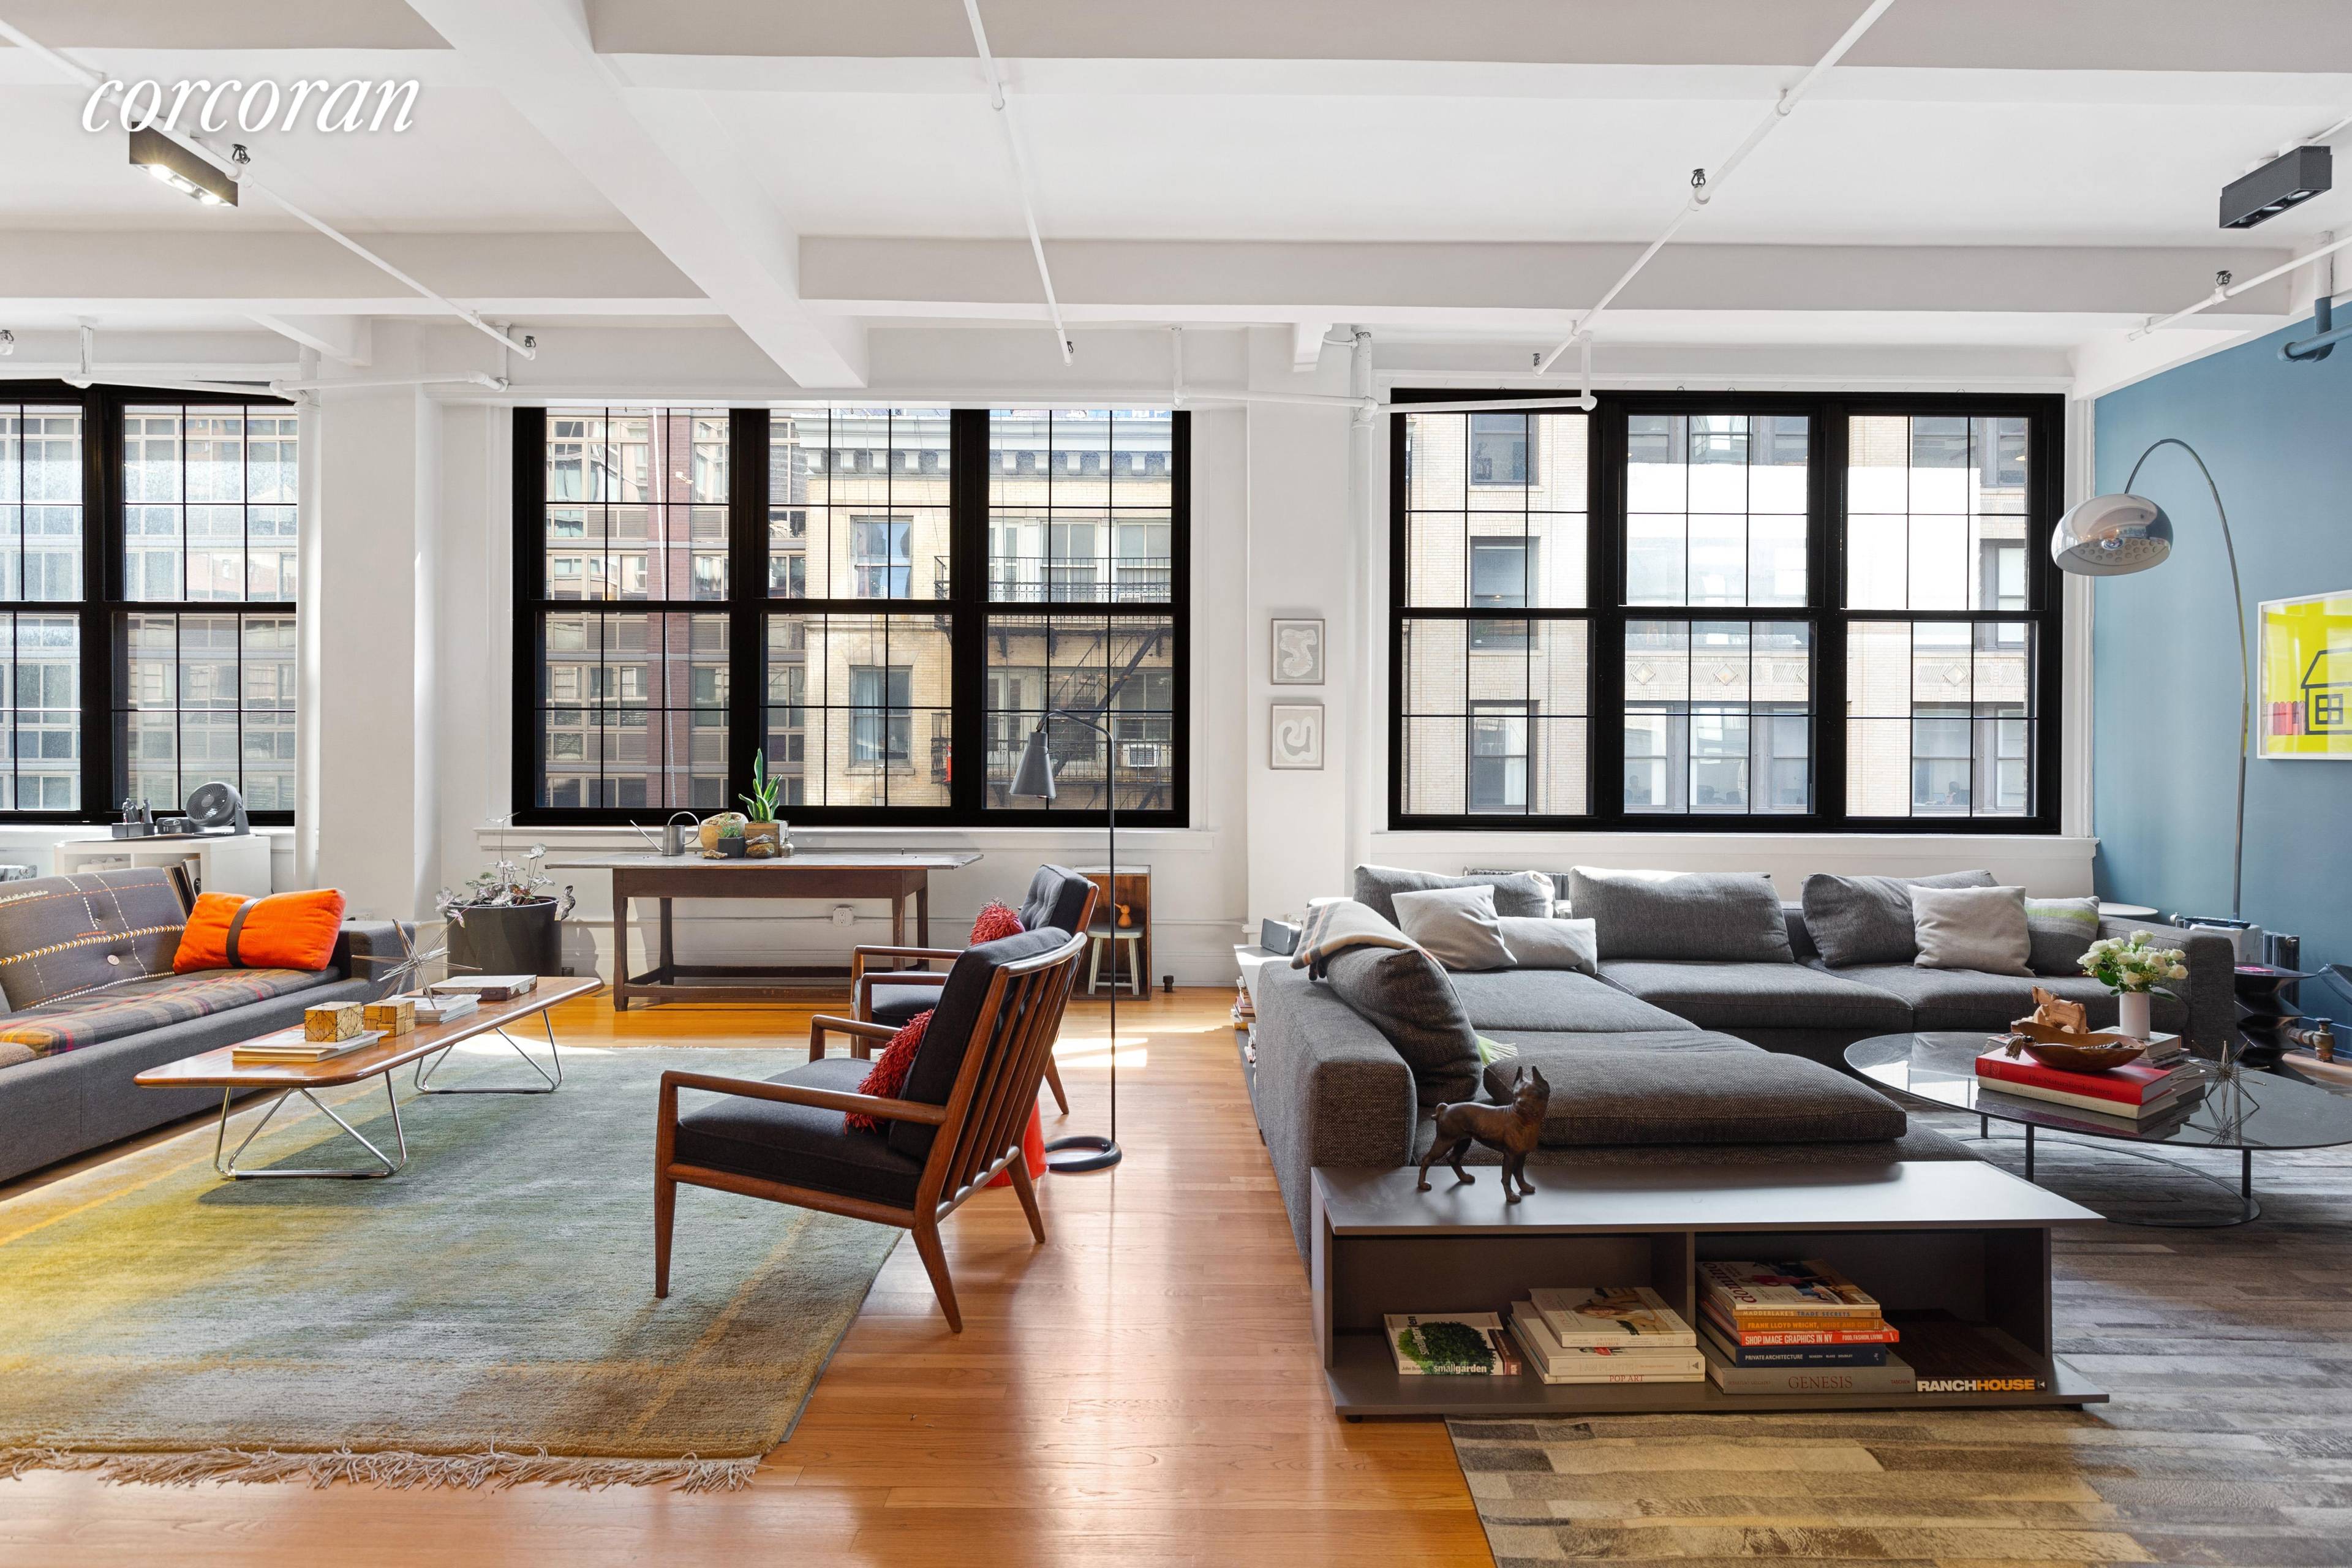 Welcome to your new home at 109 West 26th street ; a custom designed, gut renovated, sprawling loft.